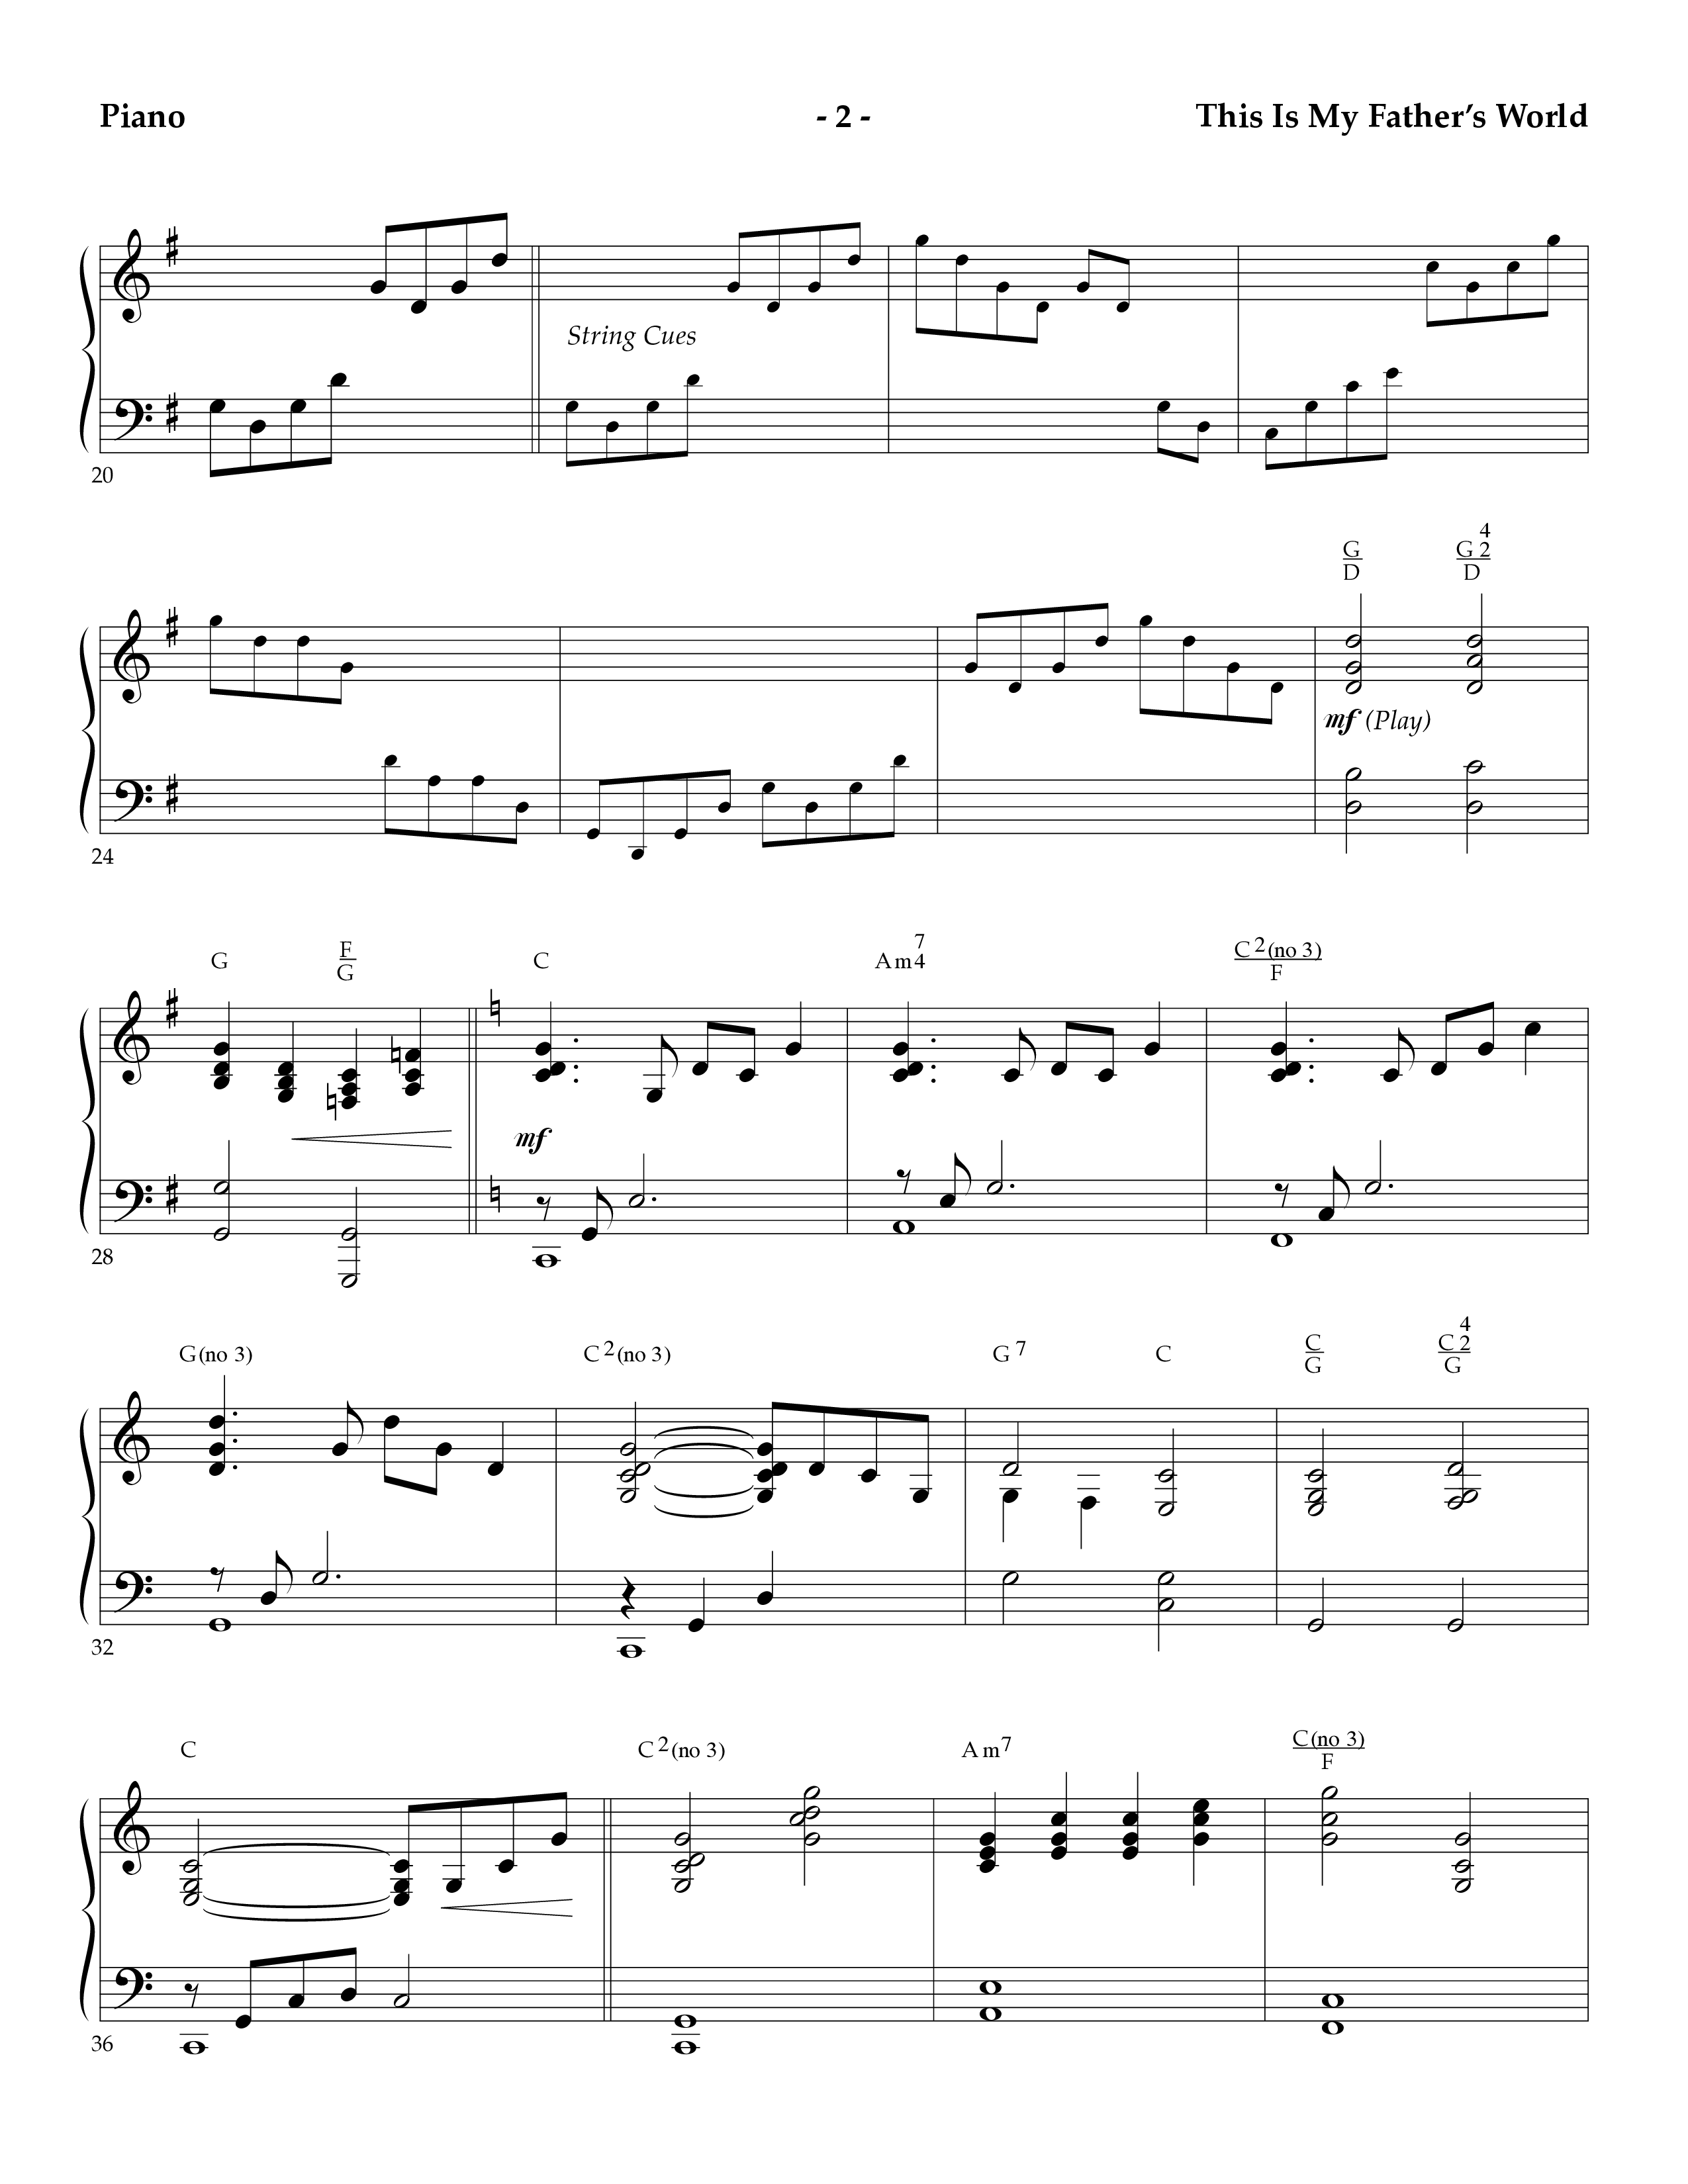 This Is My Father's World (Instrumental) Piano Sheet (Lifeway Worship / Arr. Mark Johnson)